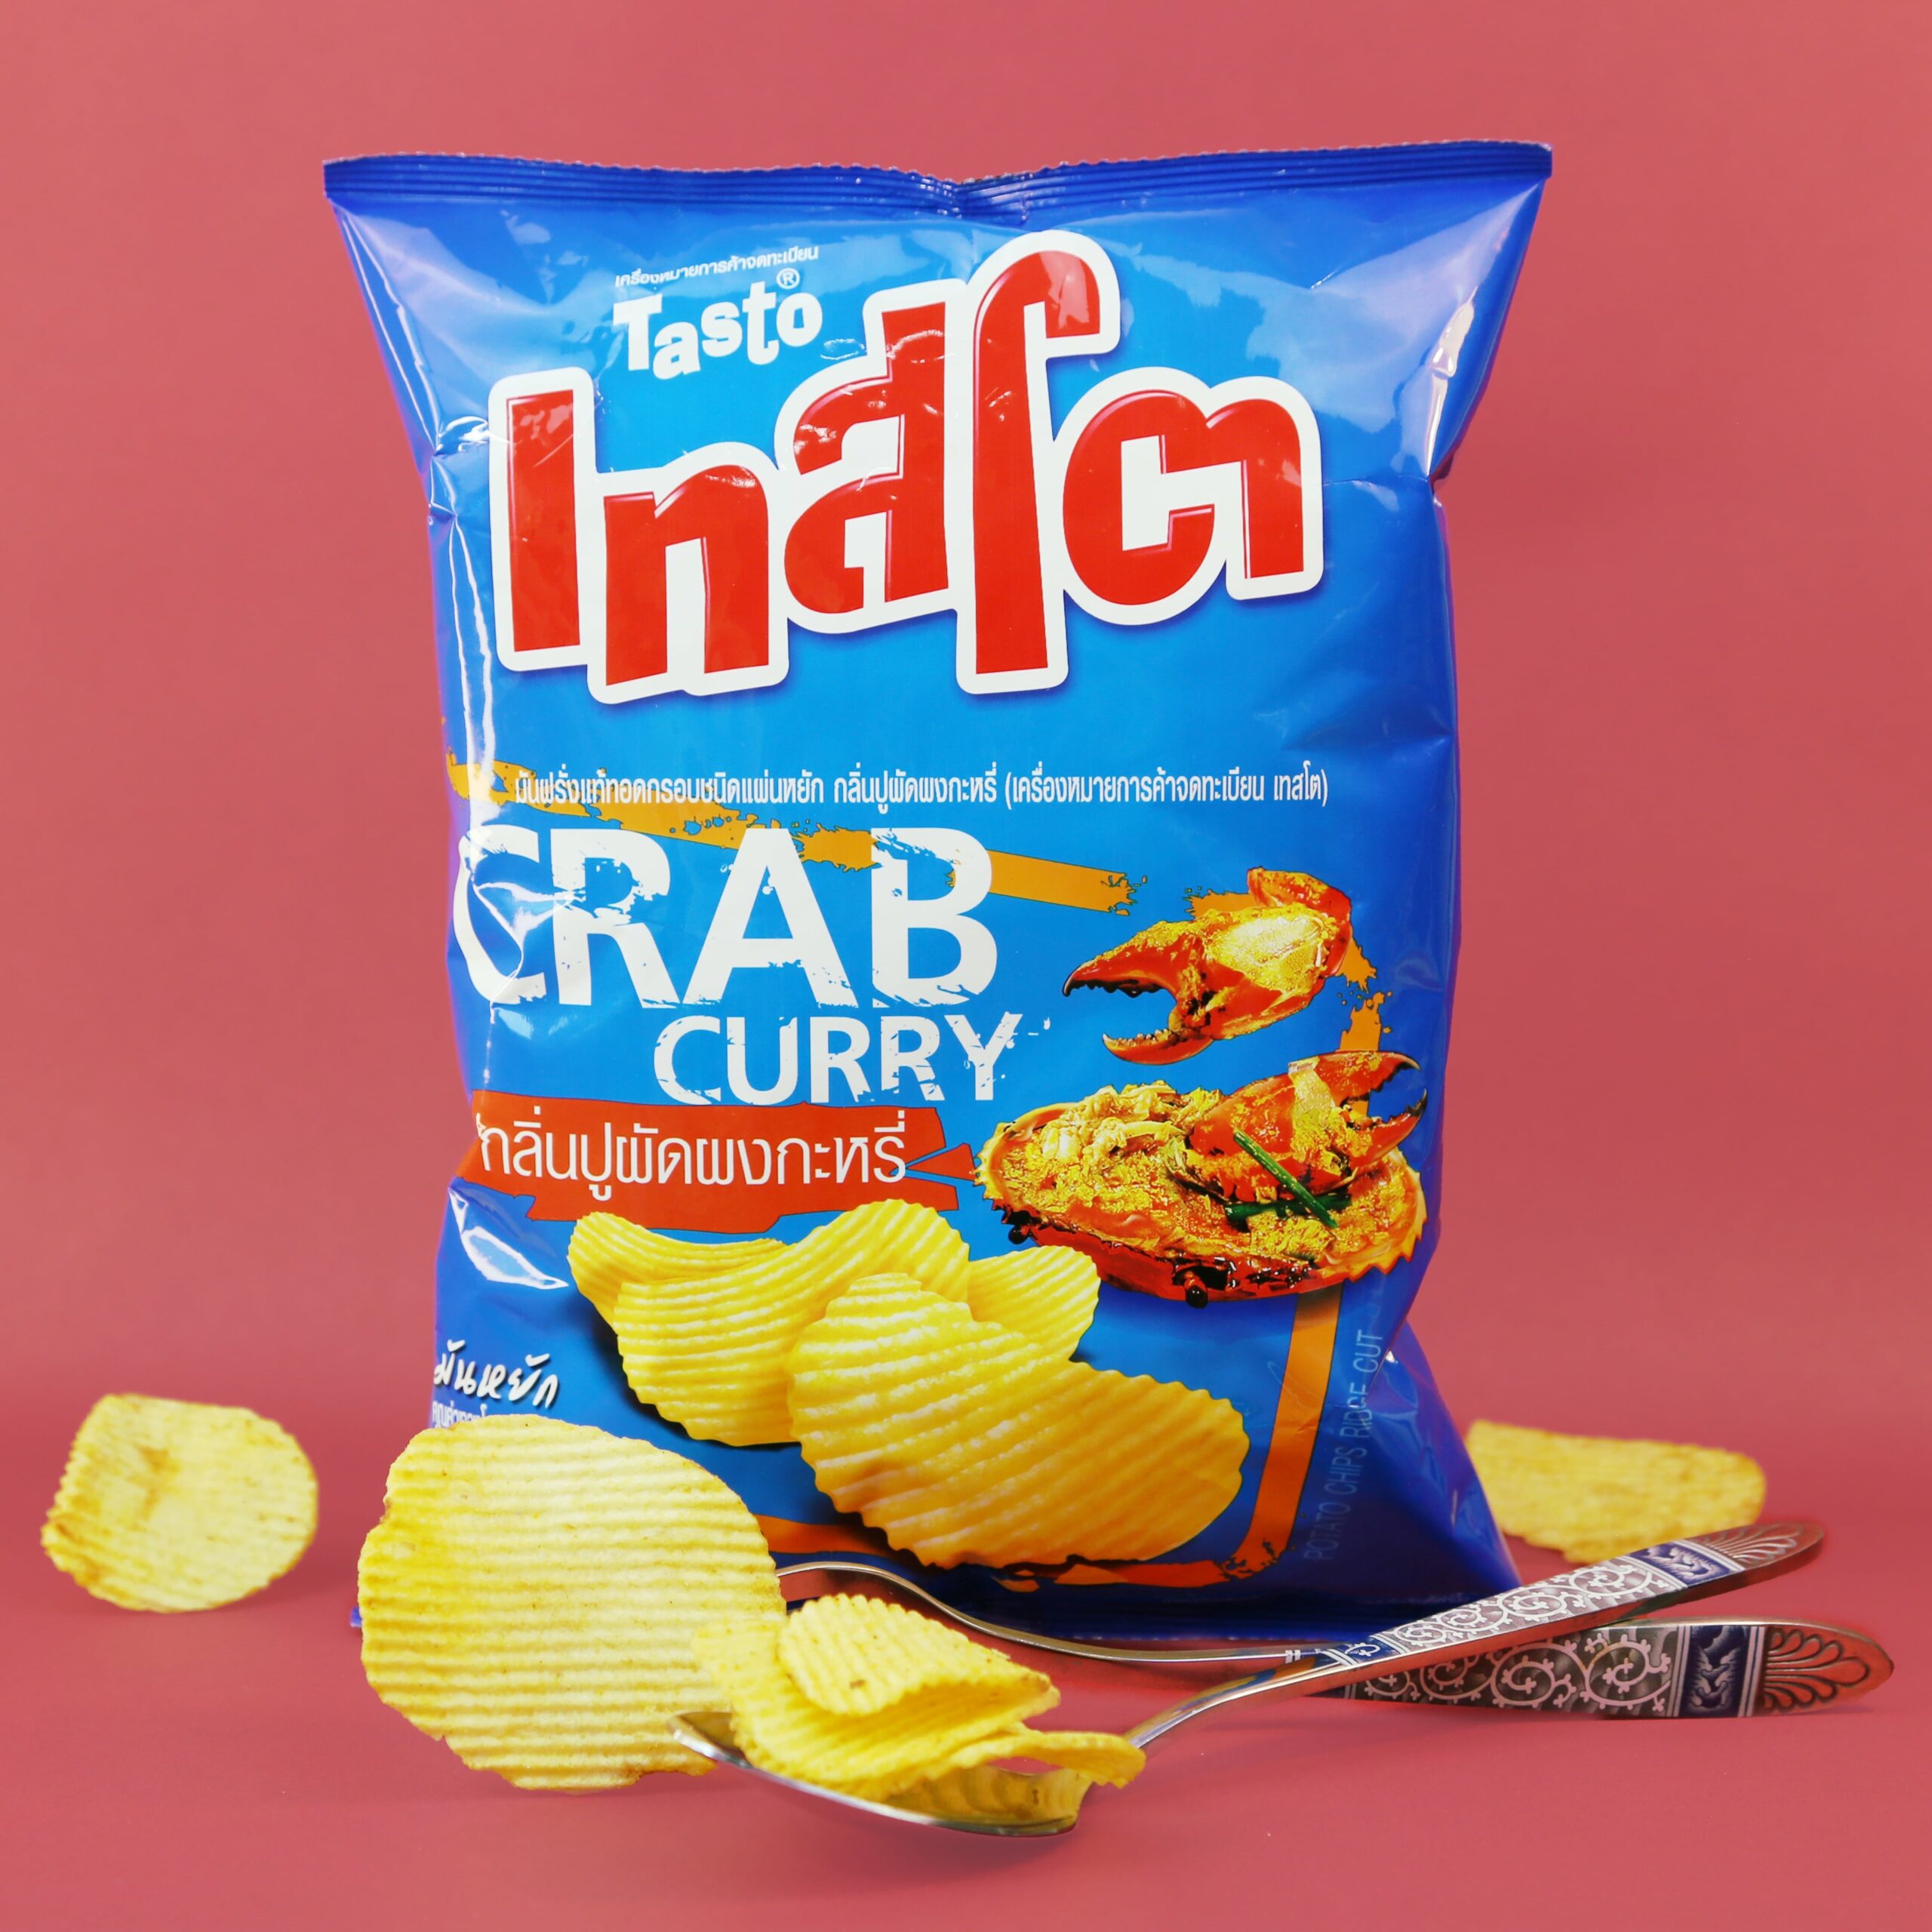 Crab curry flavored potato chips included in Heap Brand authentic Thai snack subscription box. Famous Thai souvenir